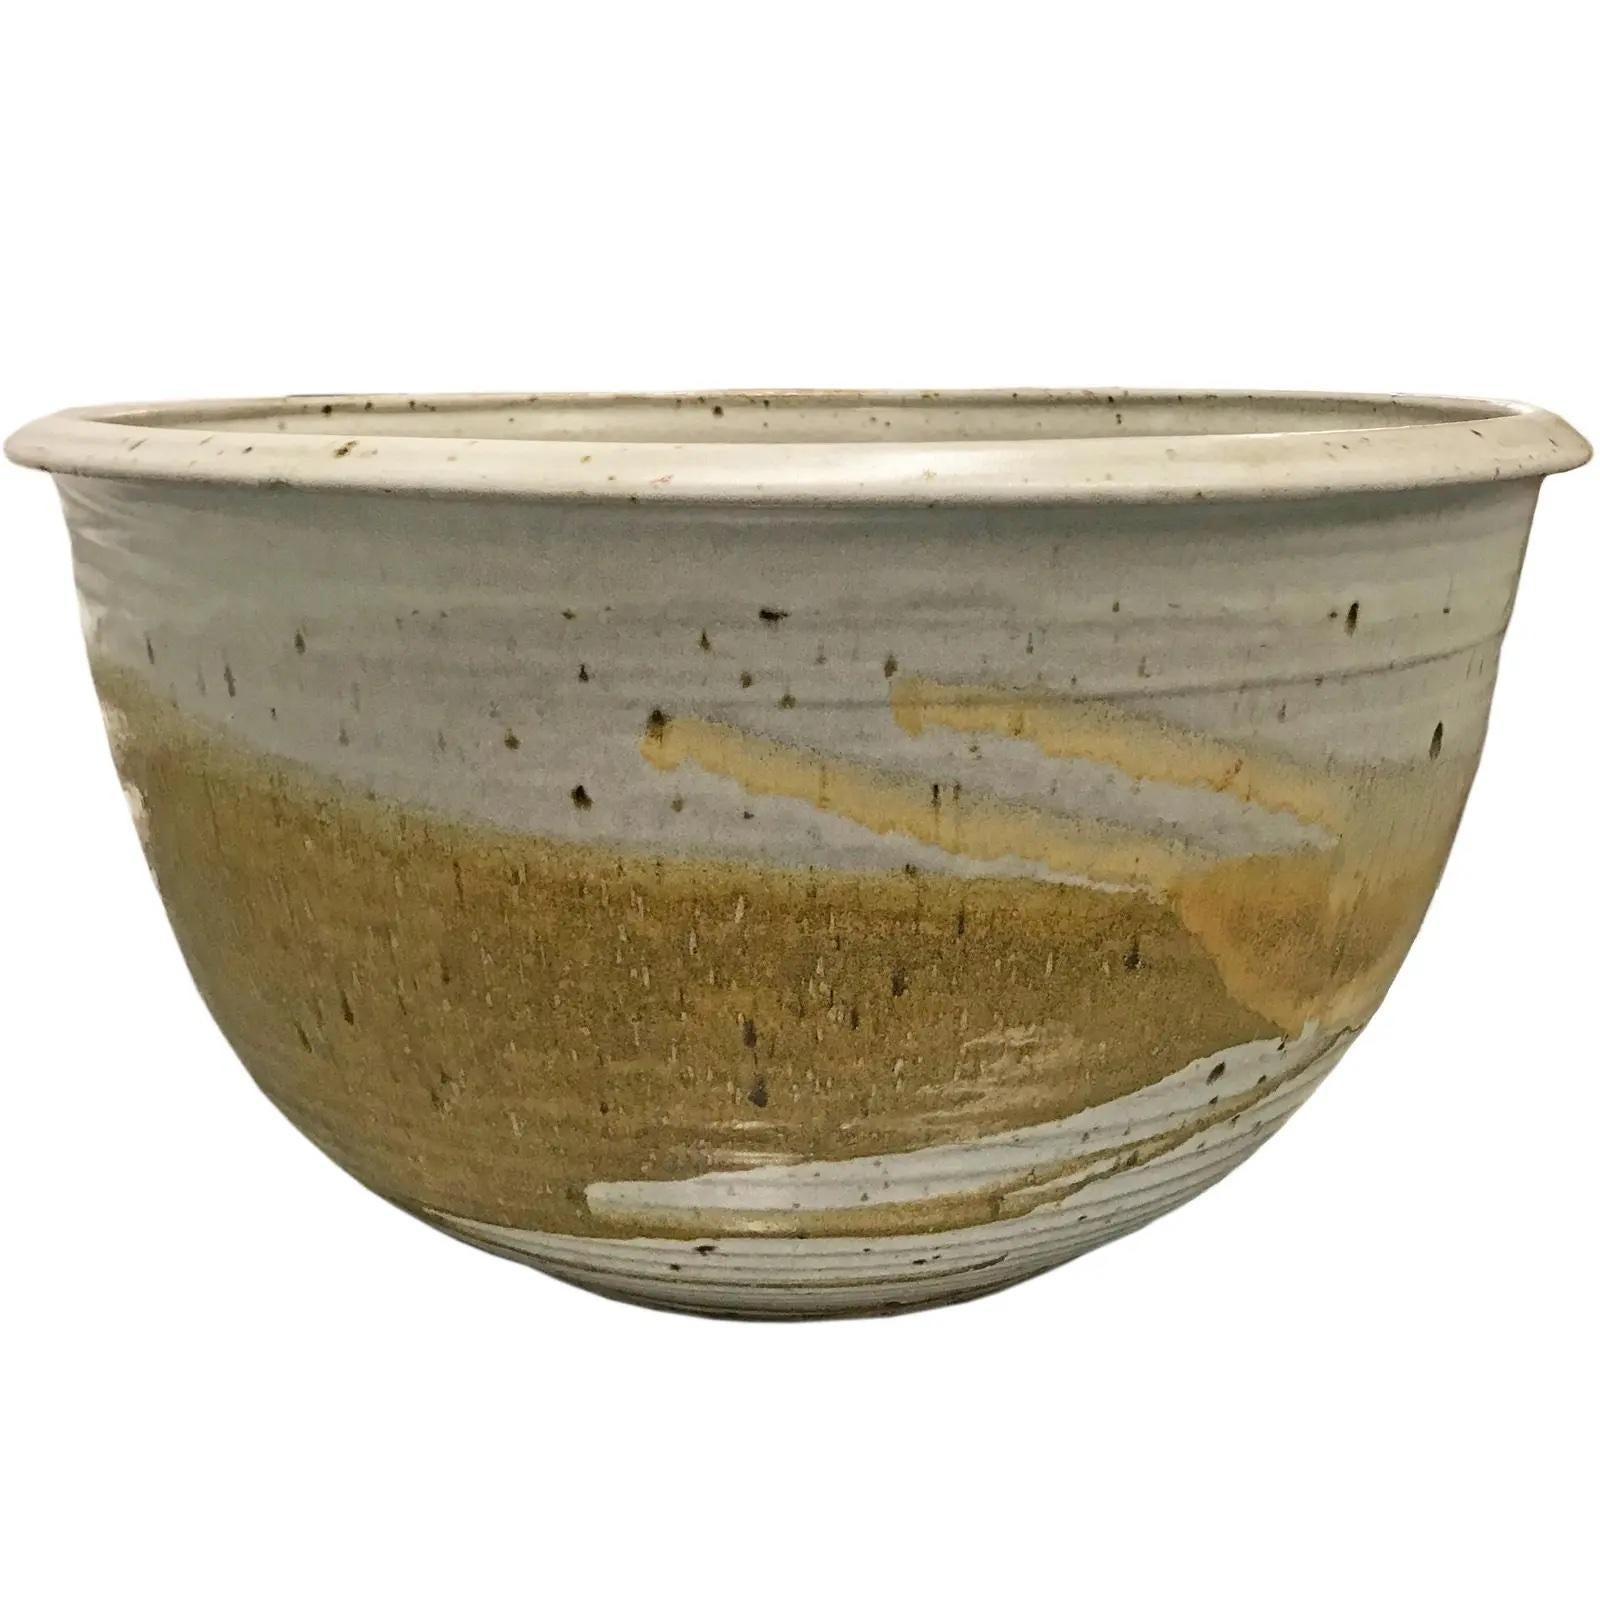 A monumental-scale mid-20th century American studio hand-thrown glazed ceramic bowl with fantastic texture and earthy neutral glaze colors. Signed illegibly on the bottom.